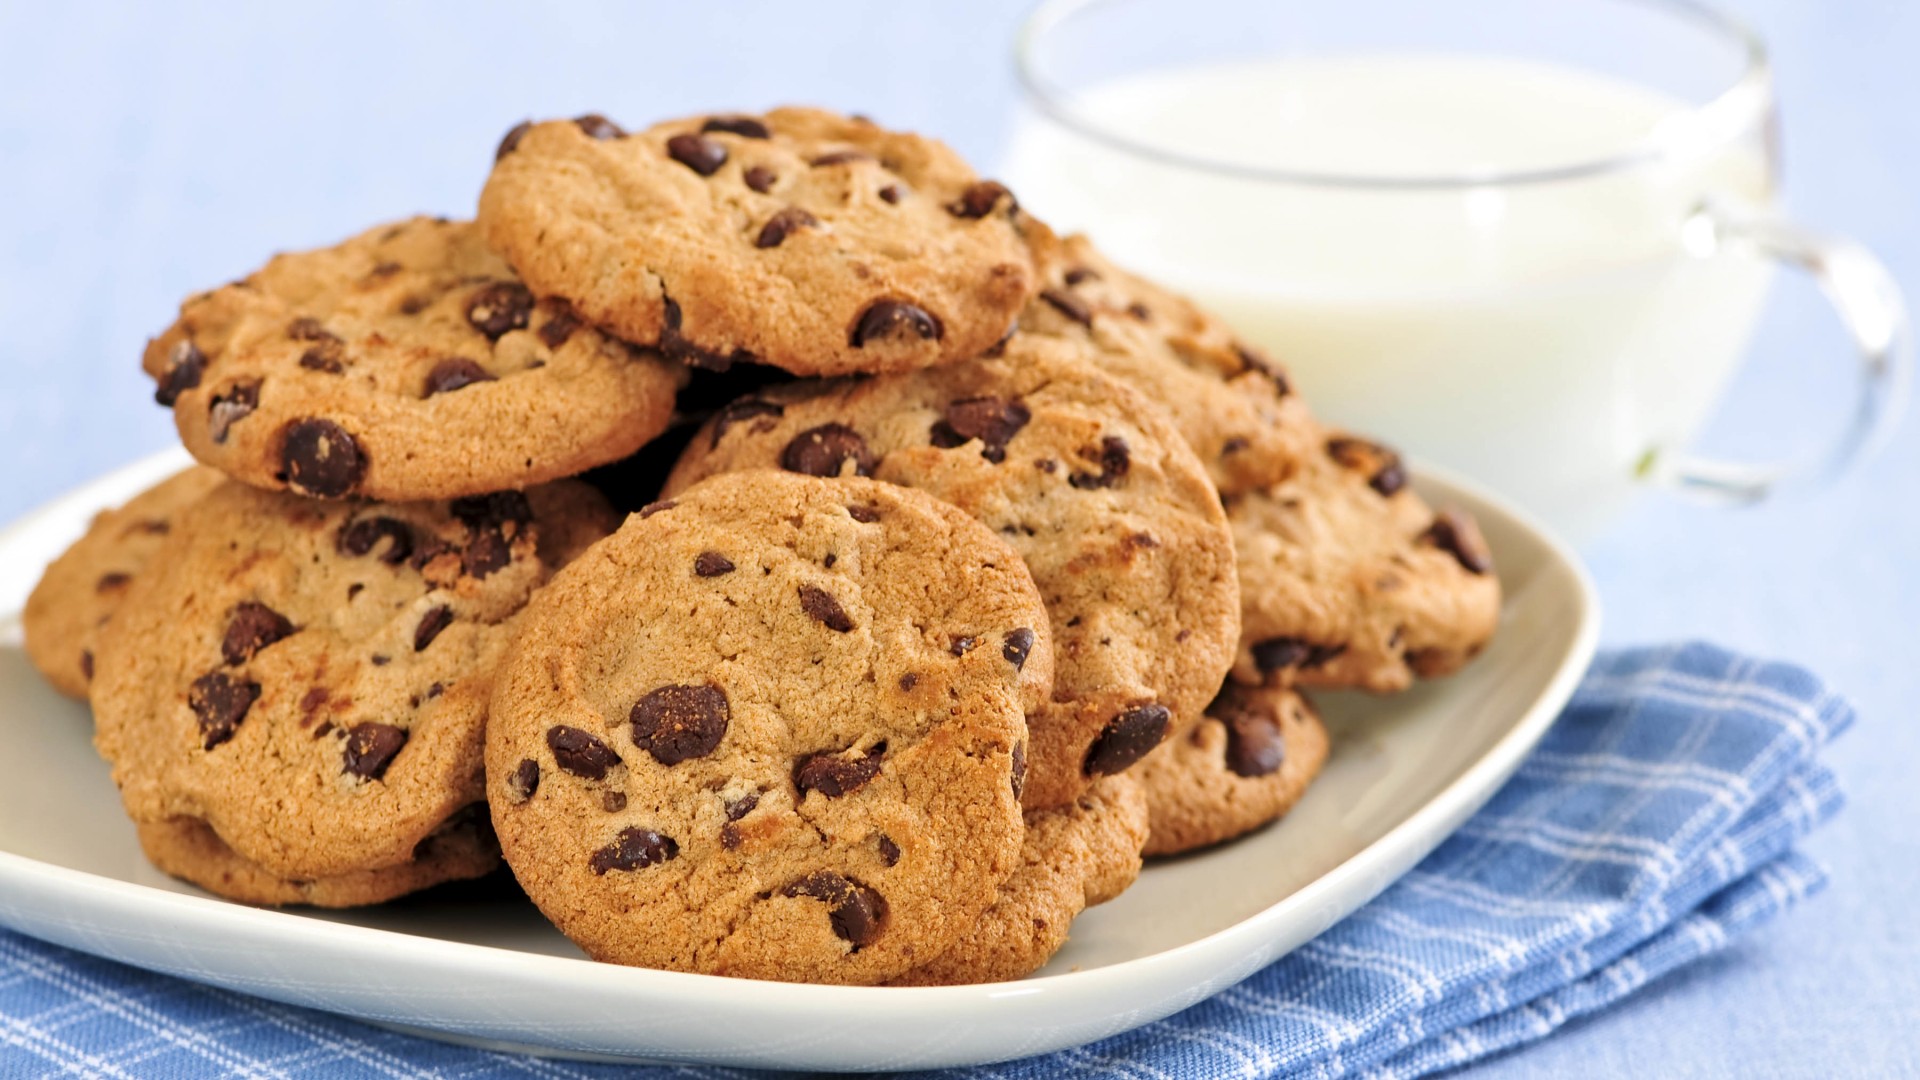 Plate of Chocolate Chip cookies